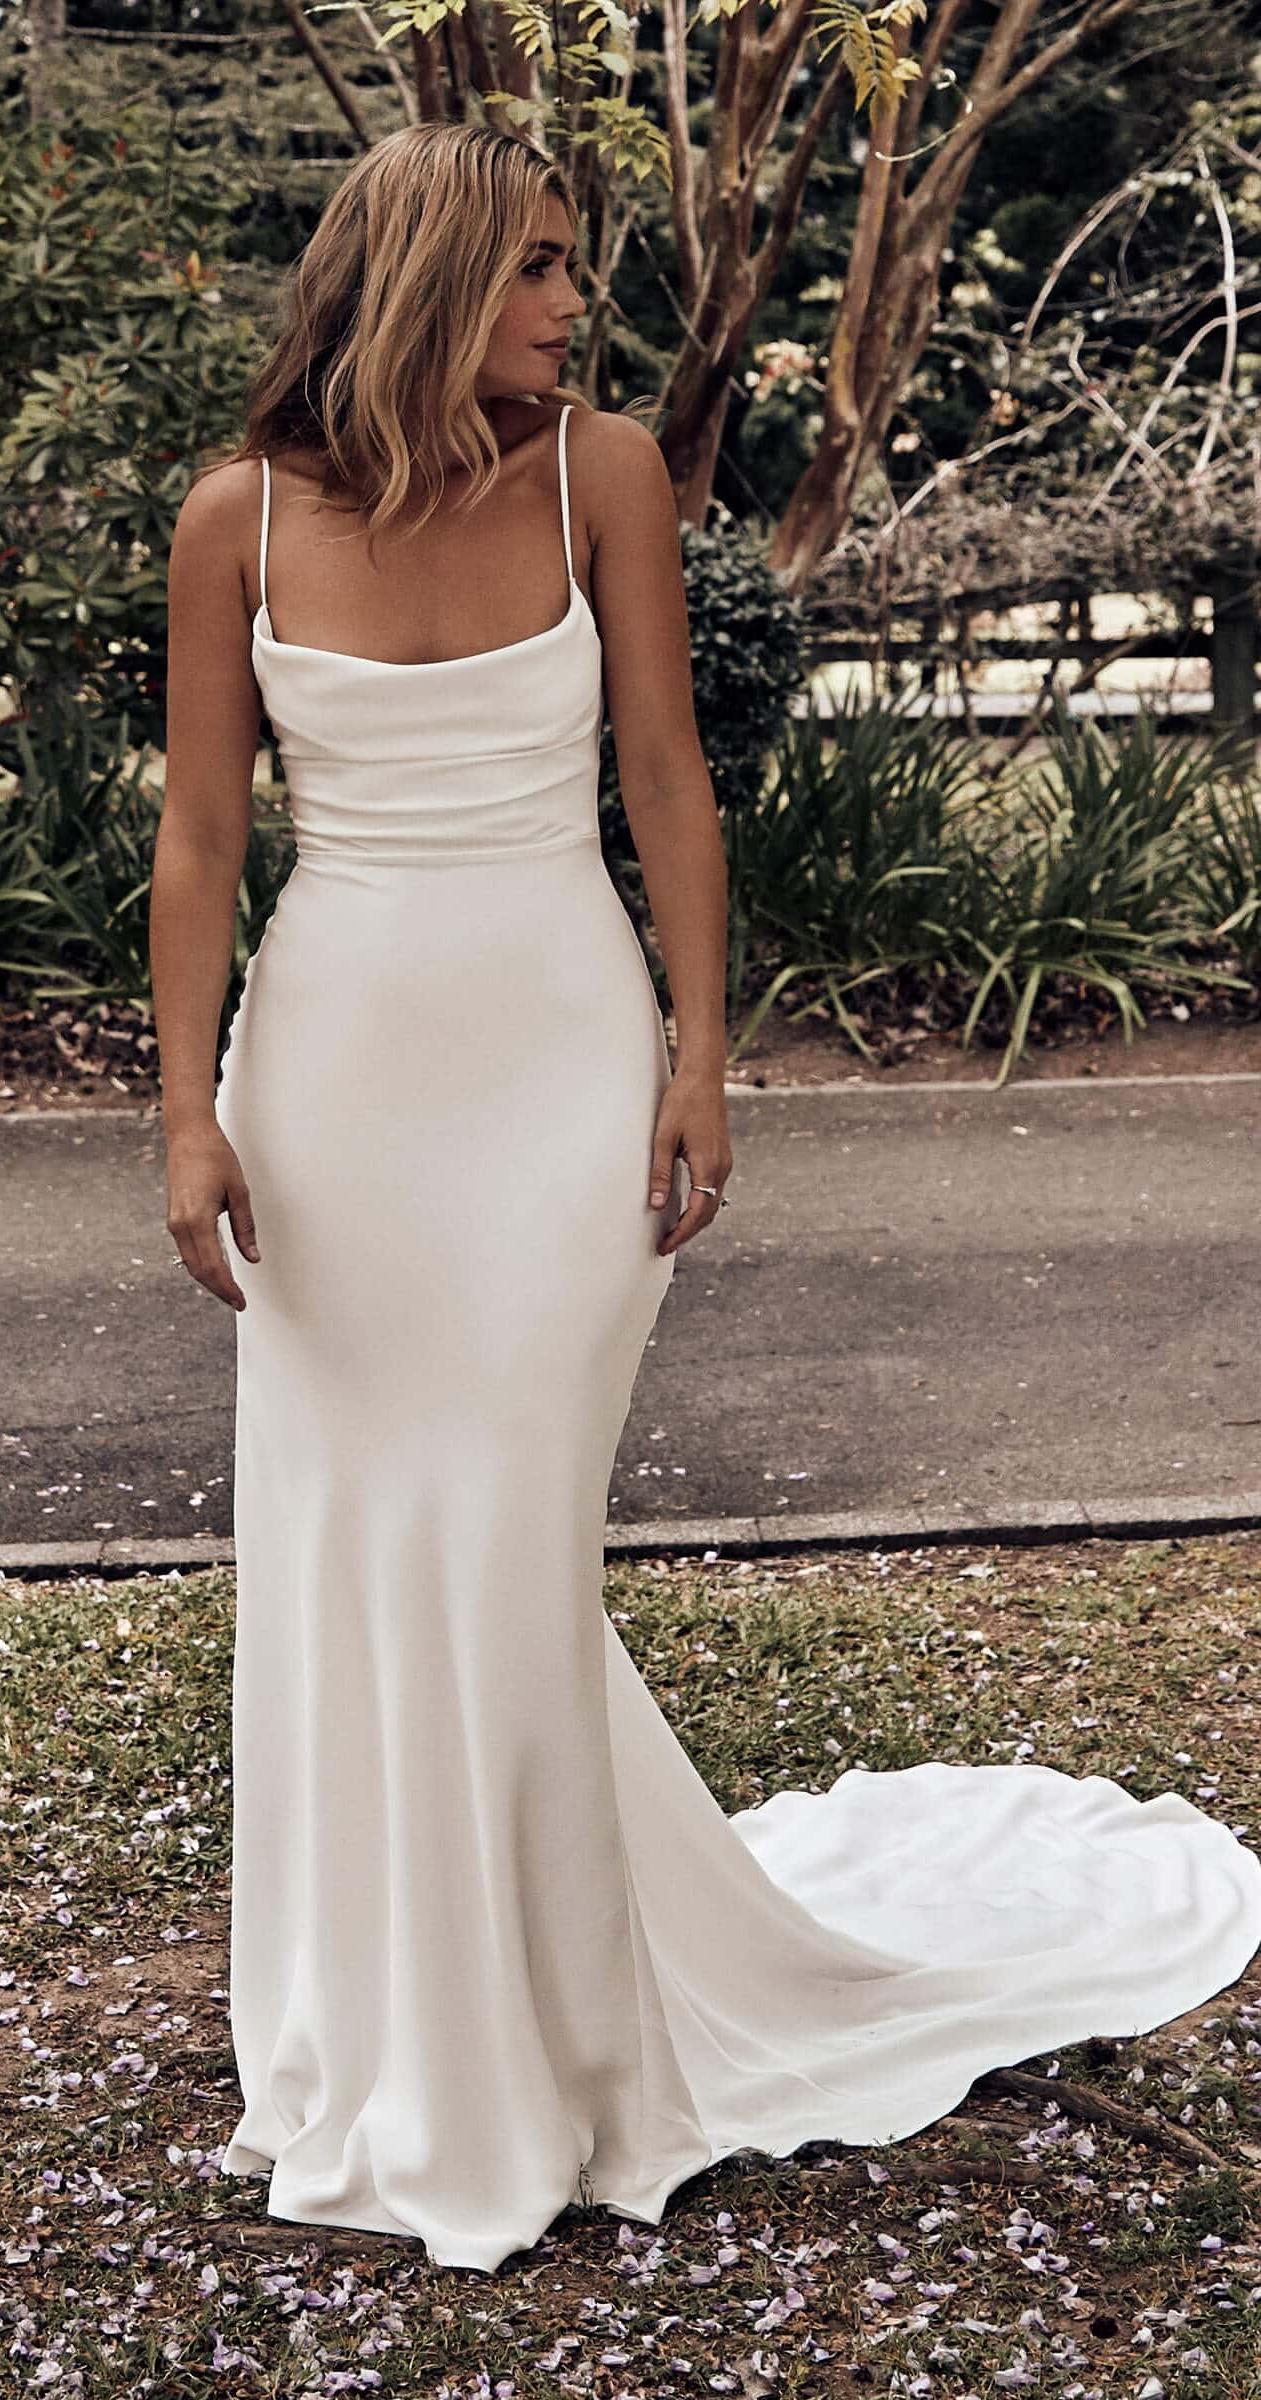 satin simple wedding dresses with spaghetti straps country beach bohemian grace loves lace